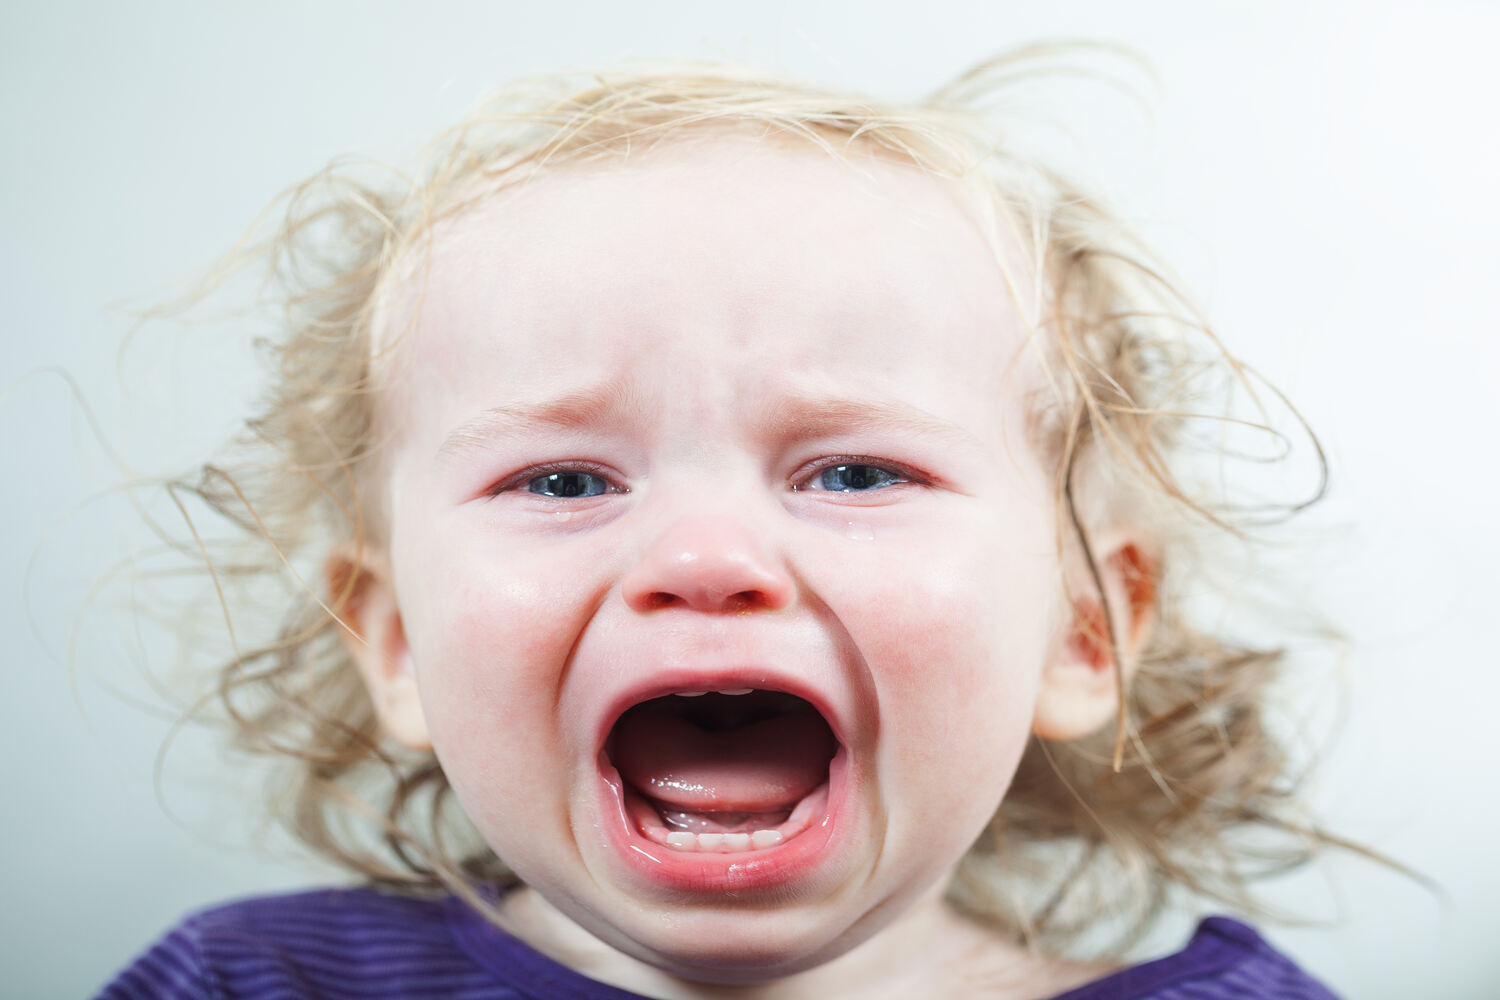 A toddler crying